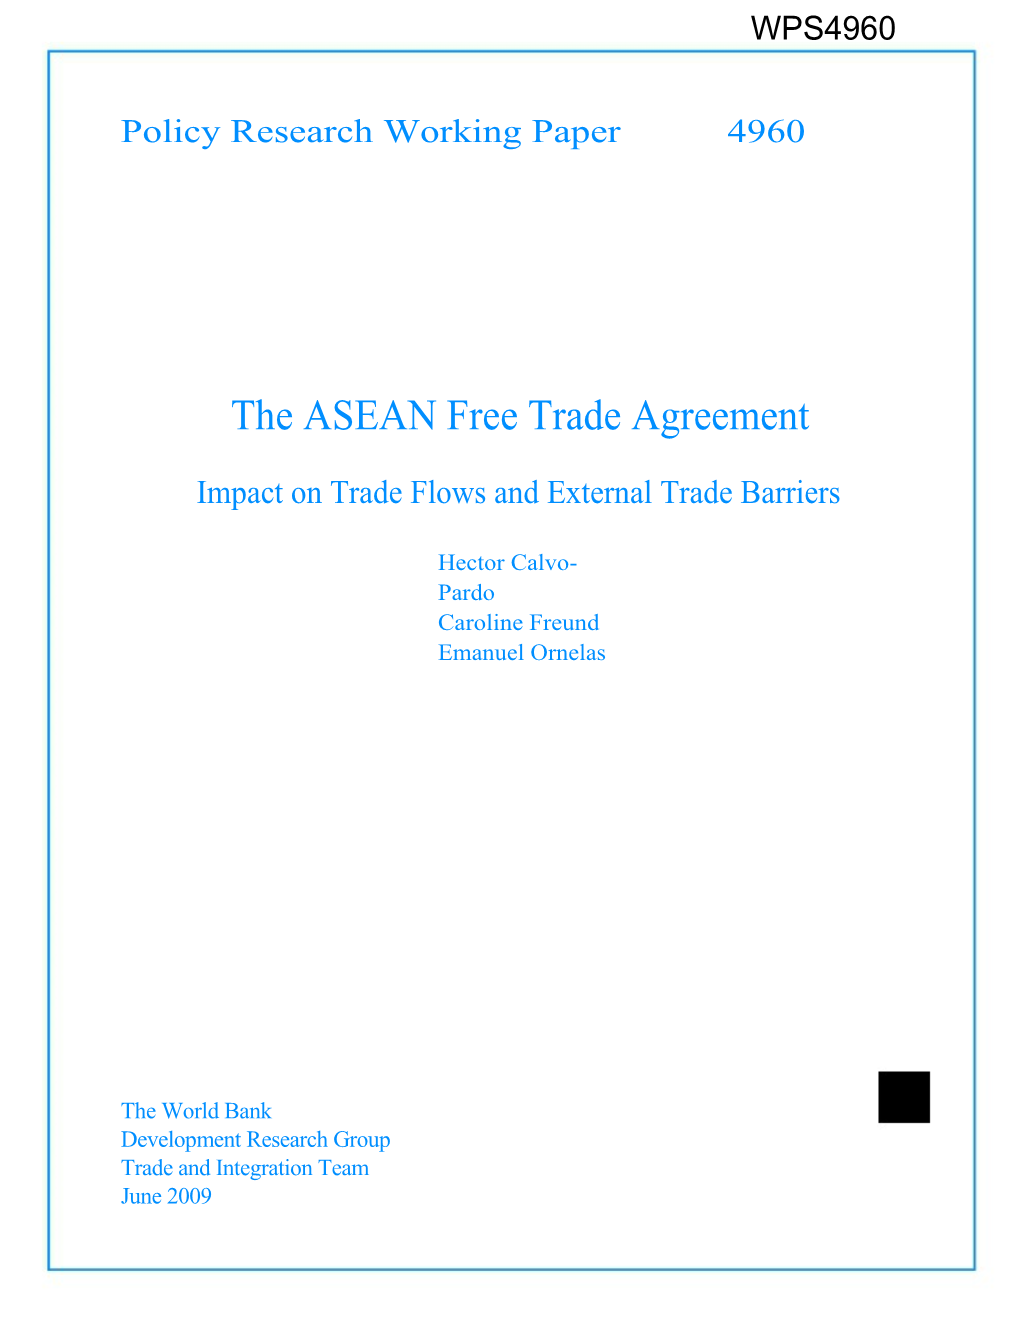 Impact on Trade Flows and External Trade Barriers